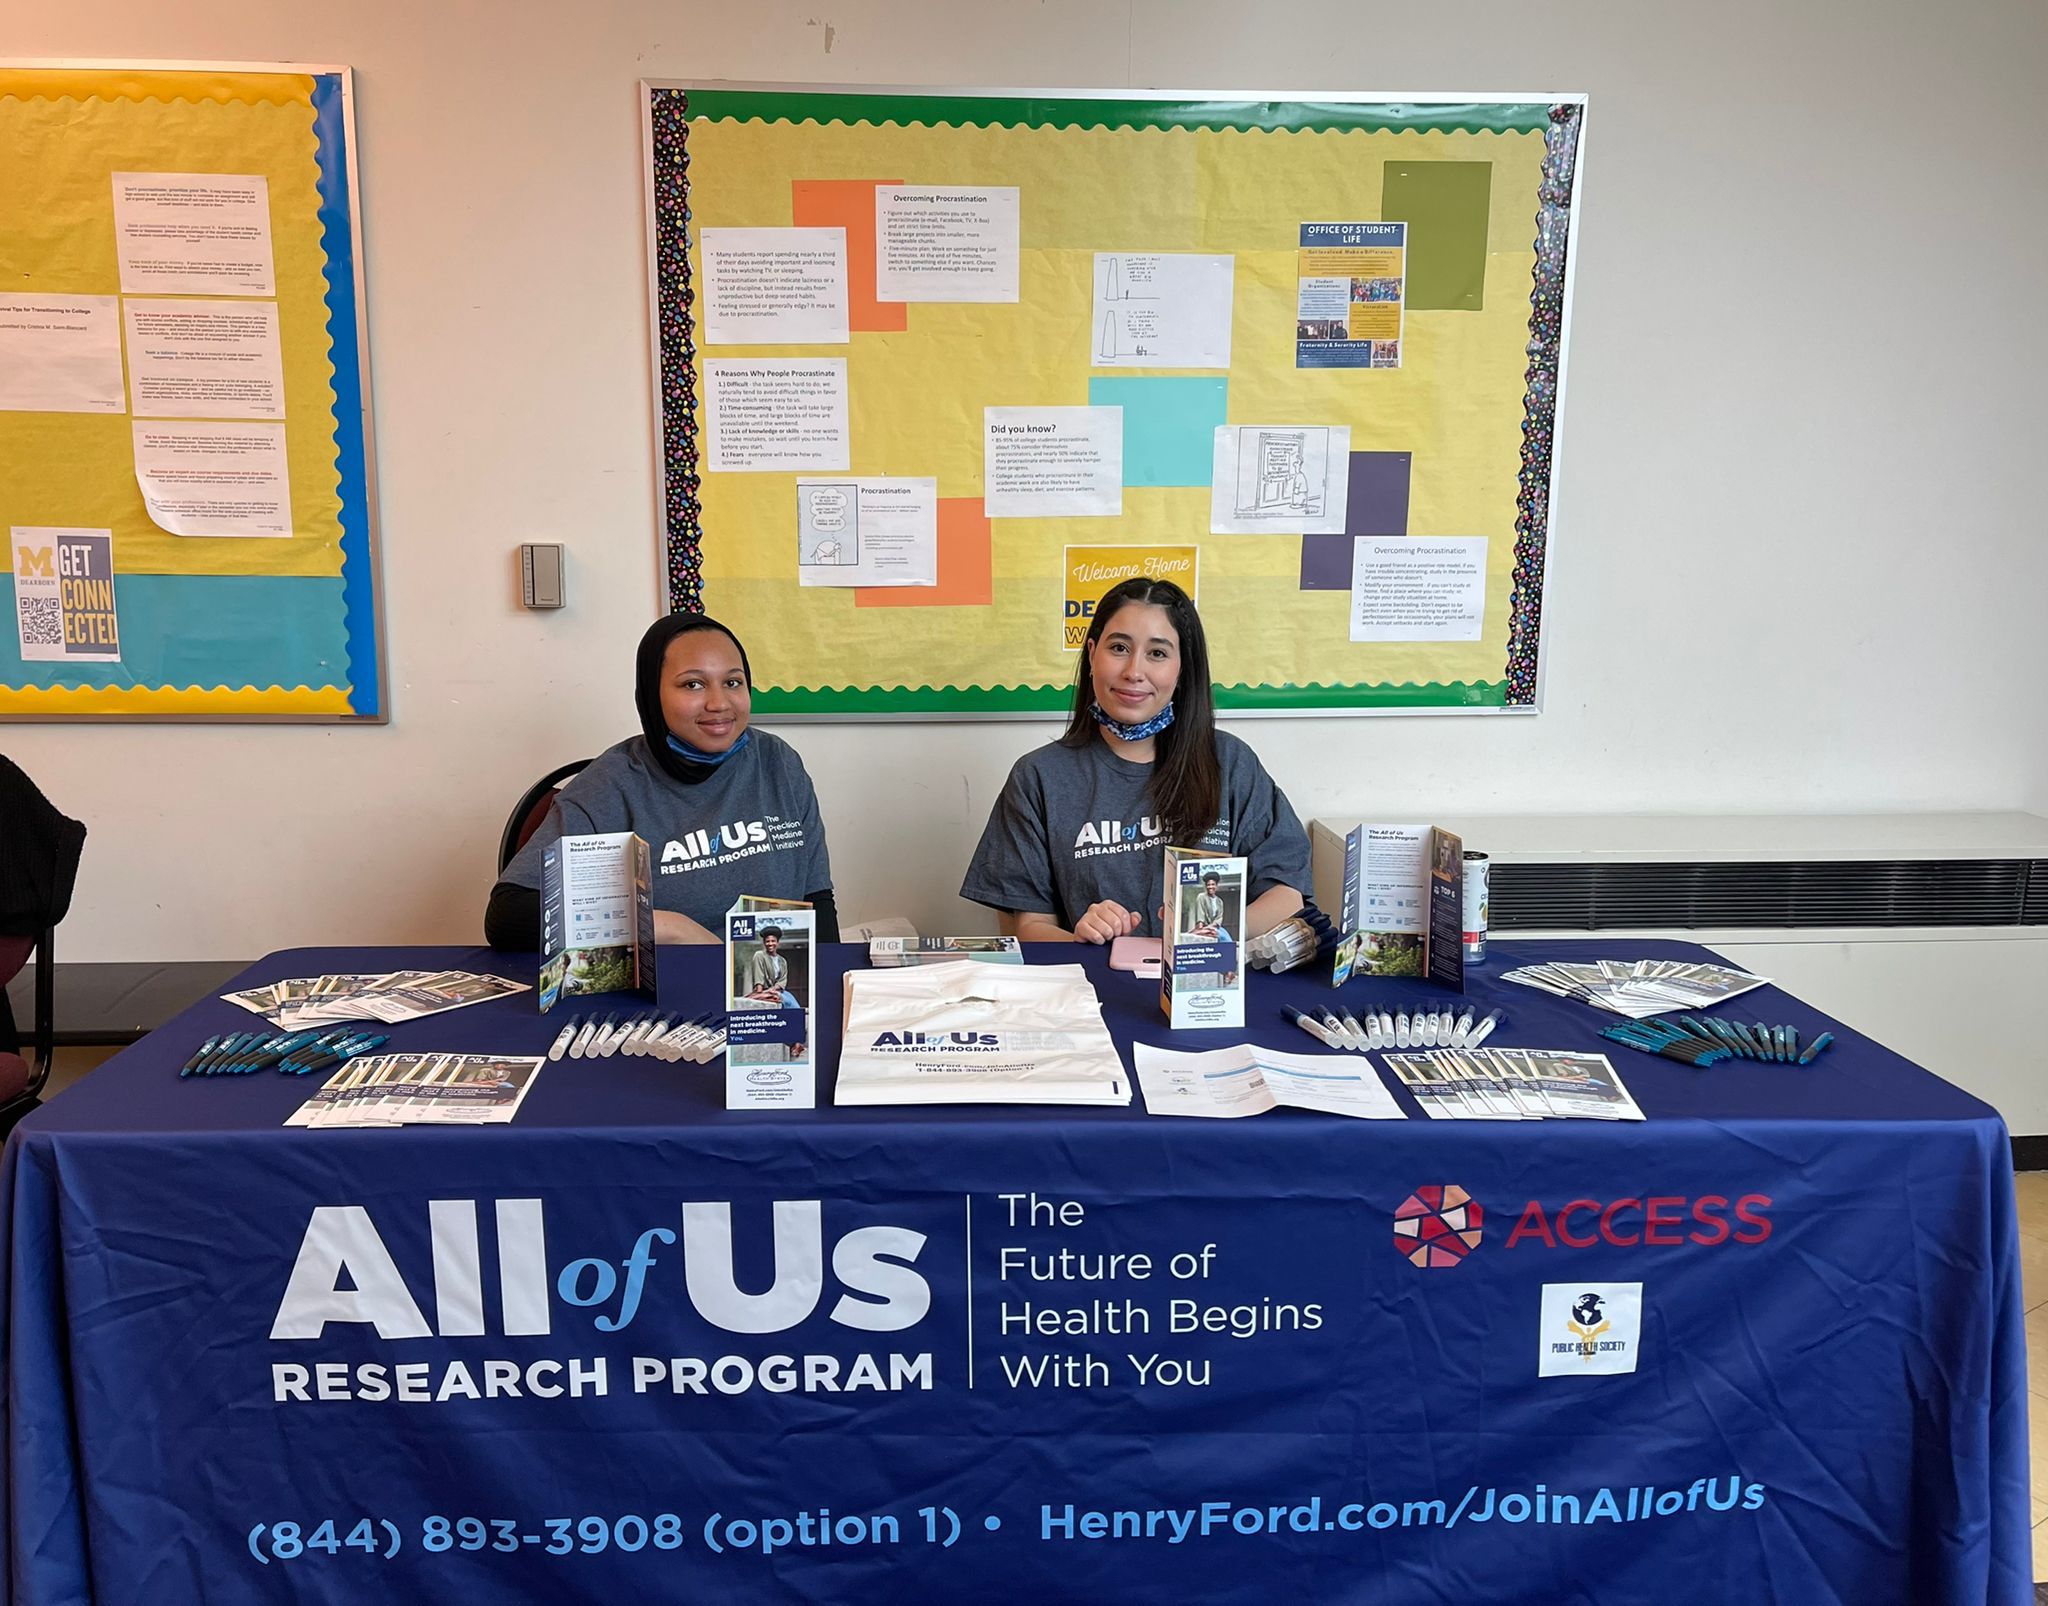 Members of the Public Health Society table regularly to recruit students for the All of Us program.